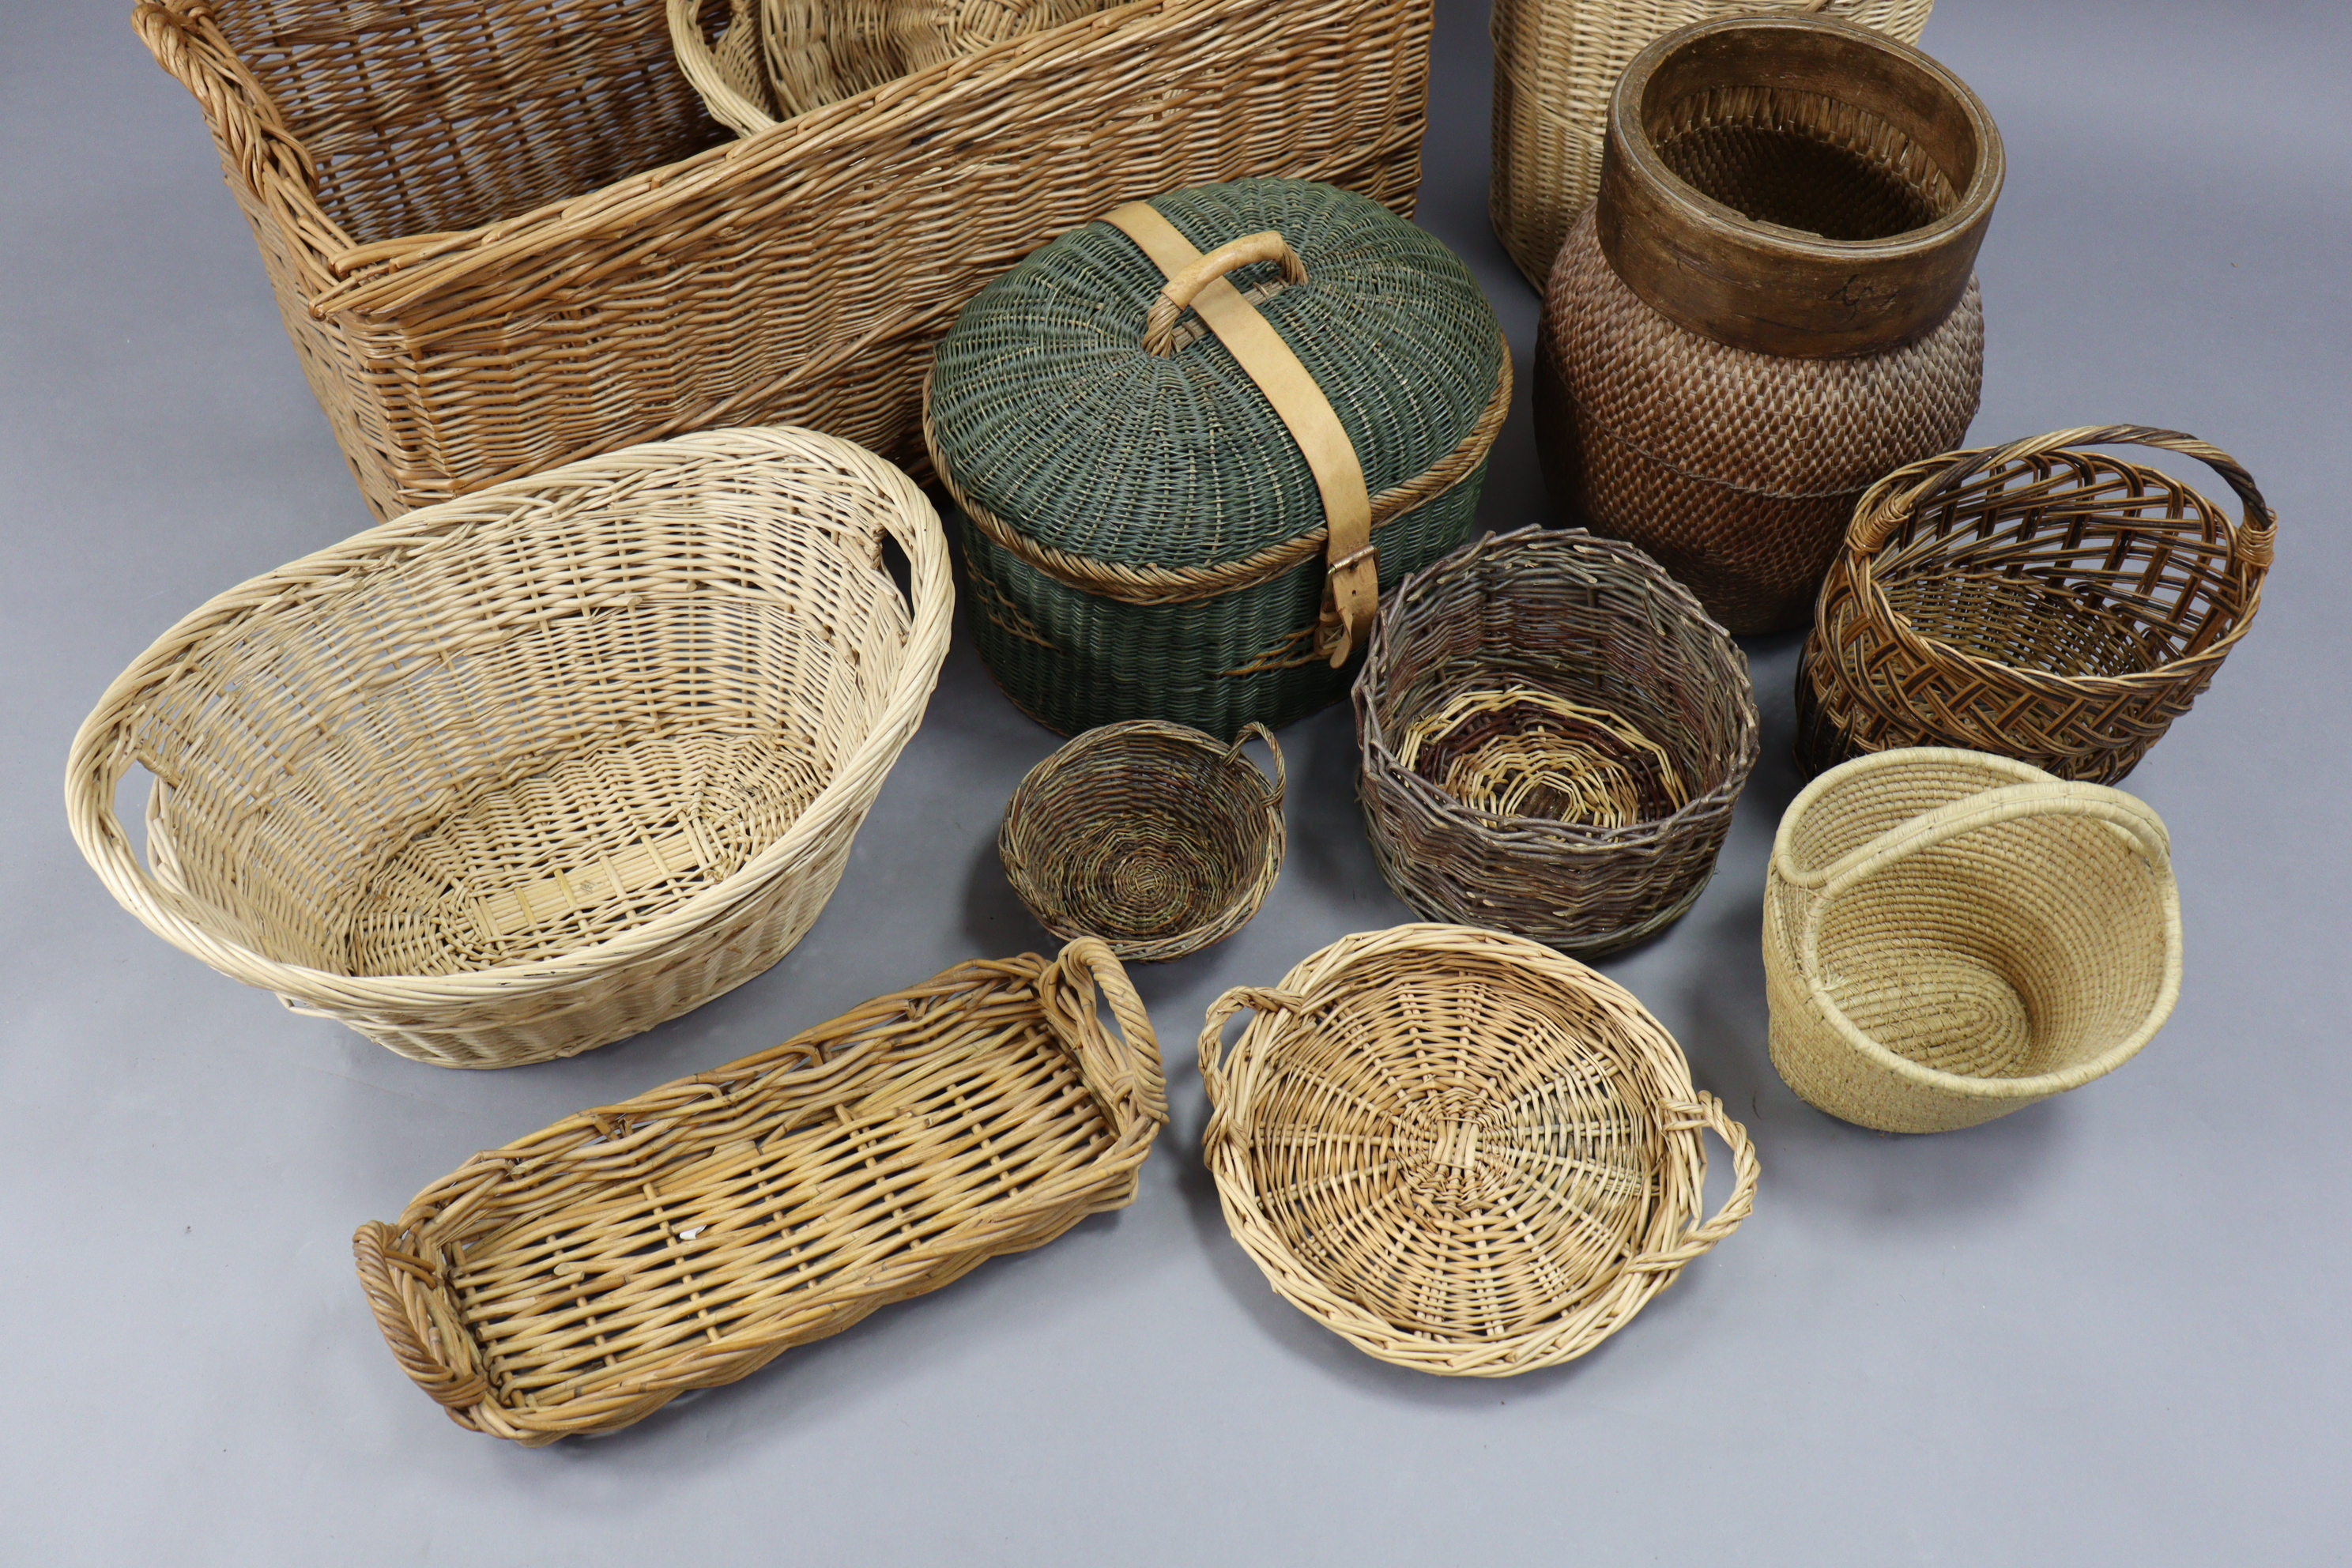 A large wicker rectangular two-handled laundry basket, 40” wide; together with various other - Image 4 of 5